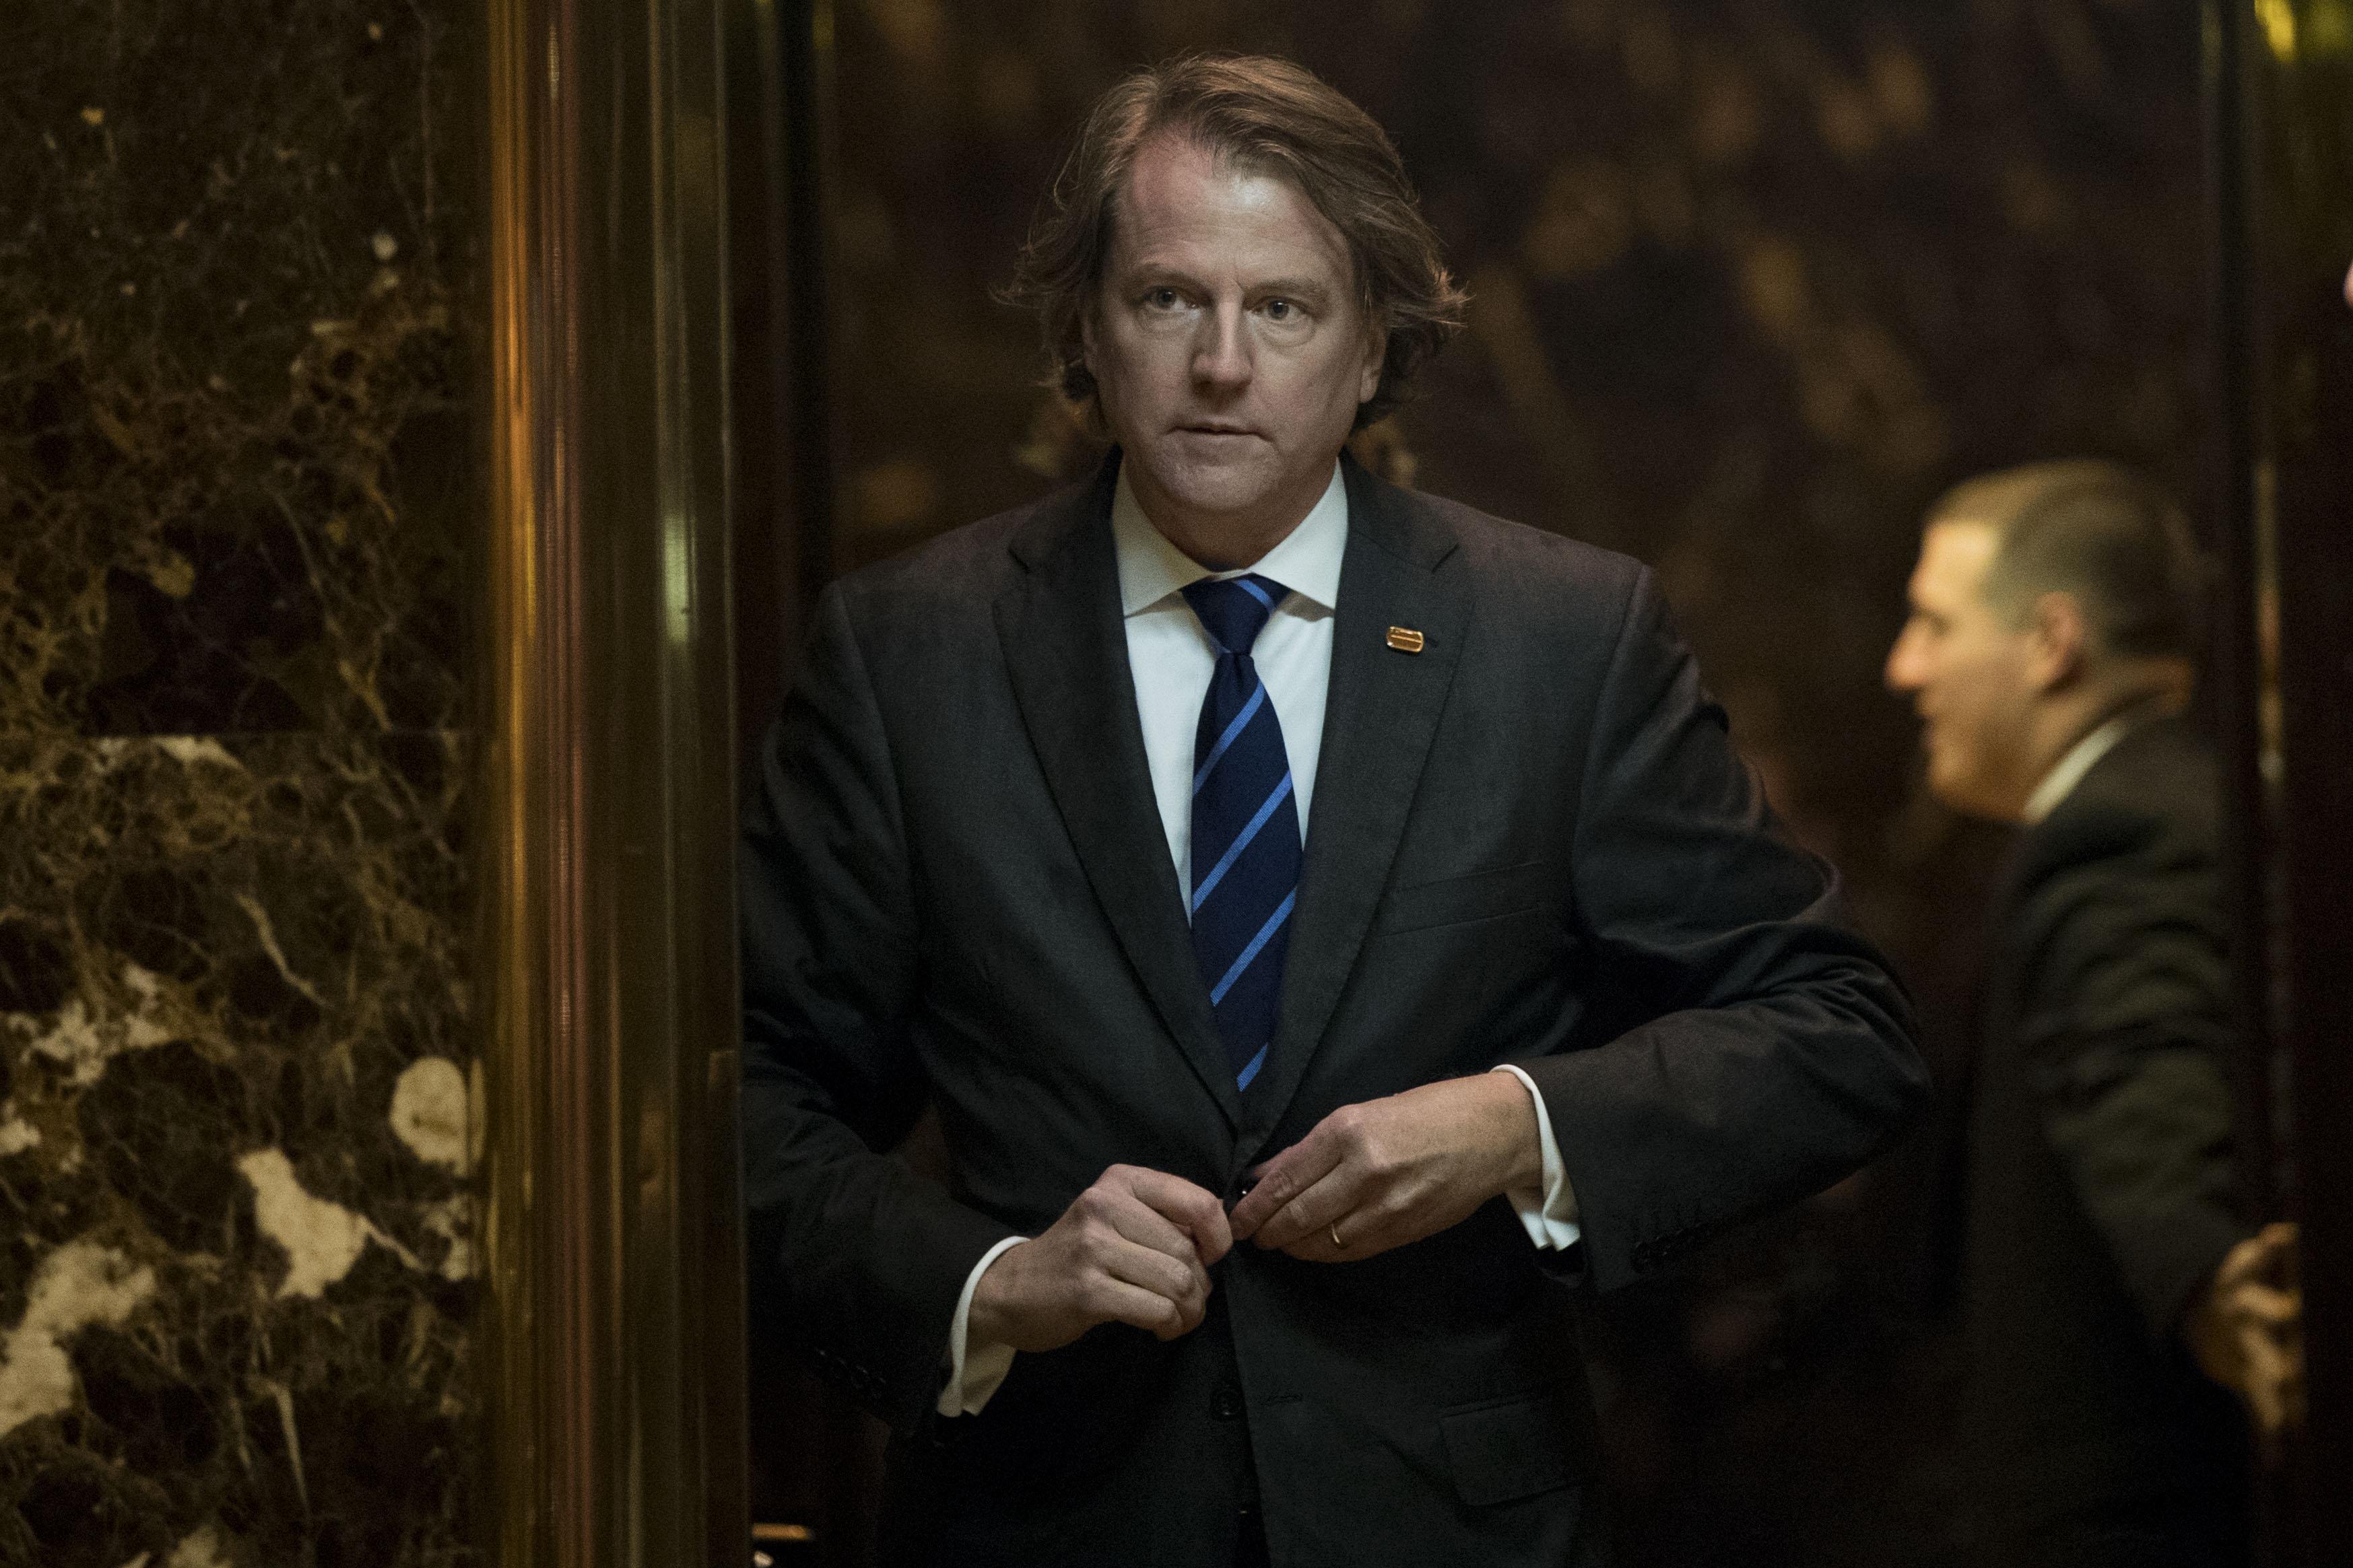 Don McGahn buttons his suit jacket as he gets into an elevator.